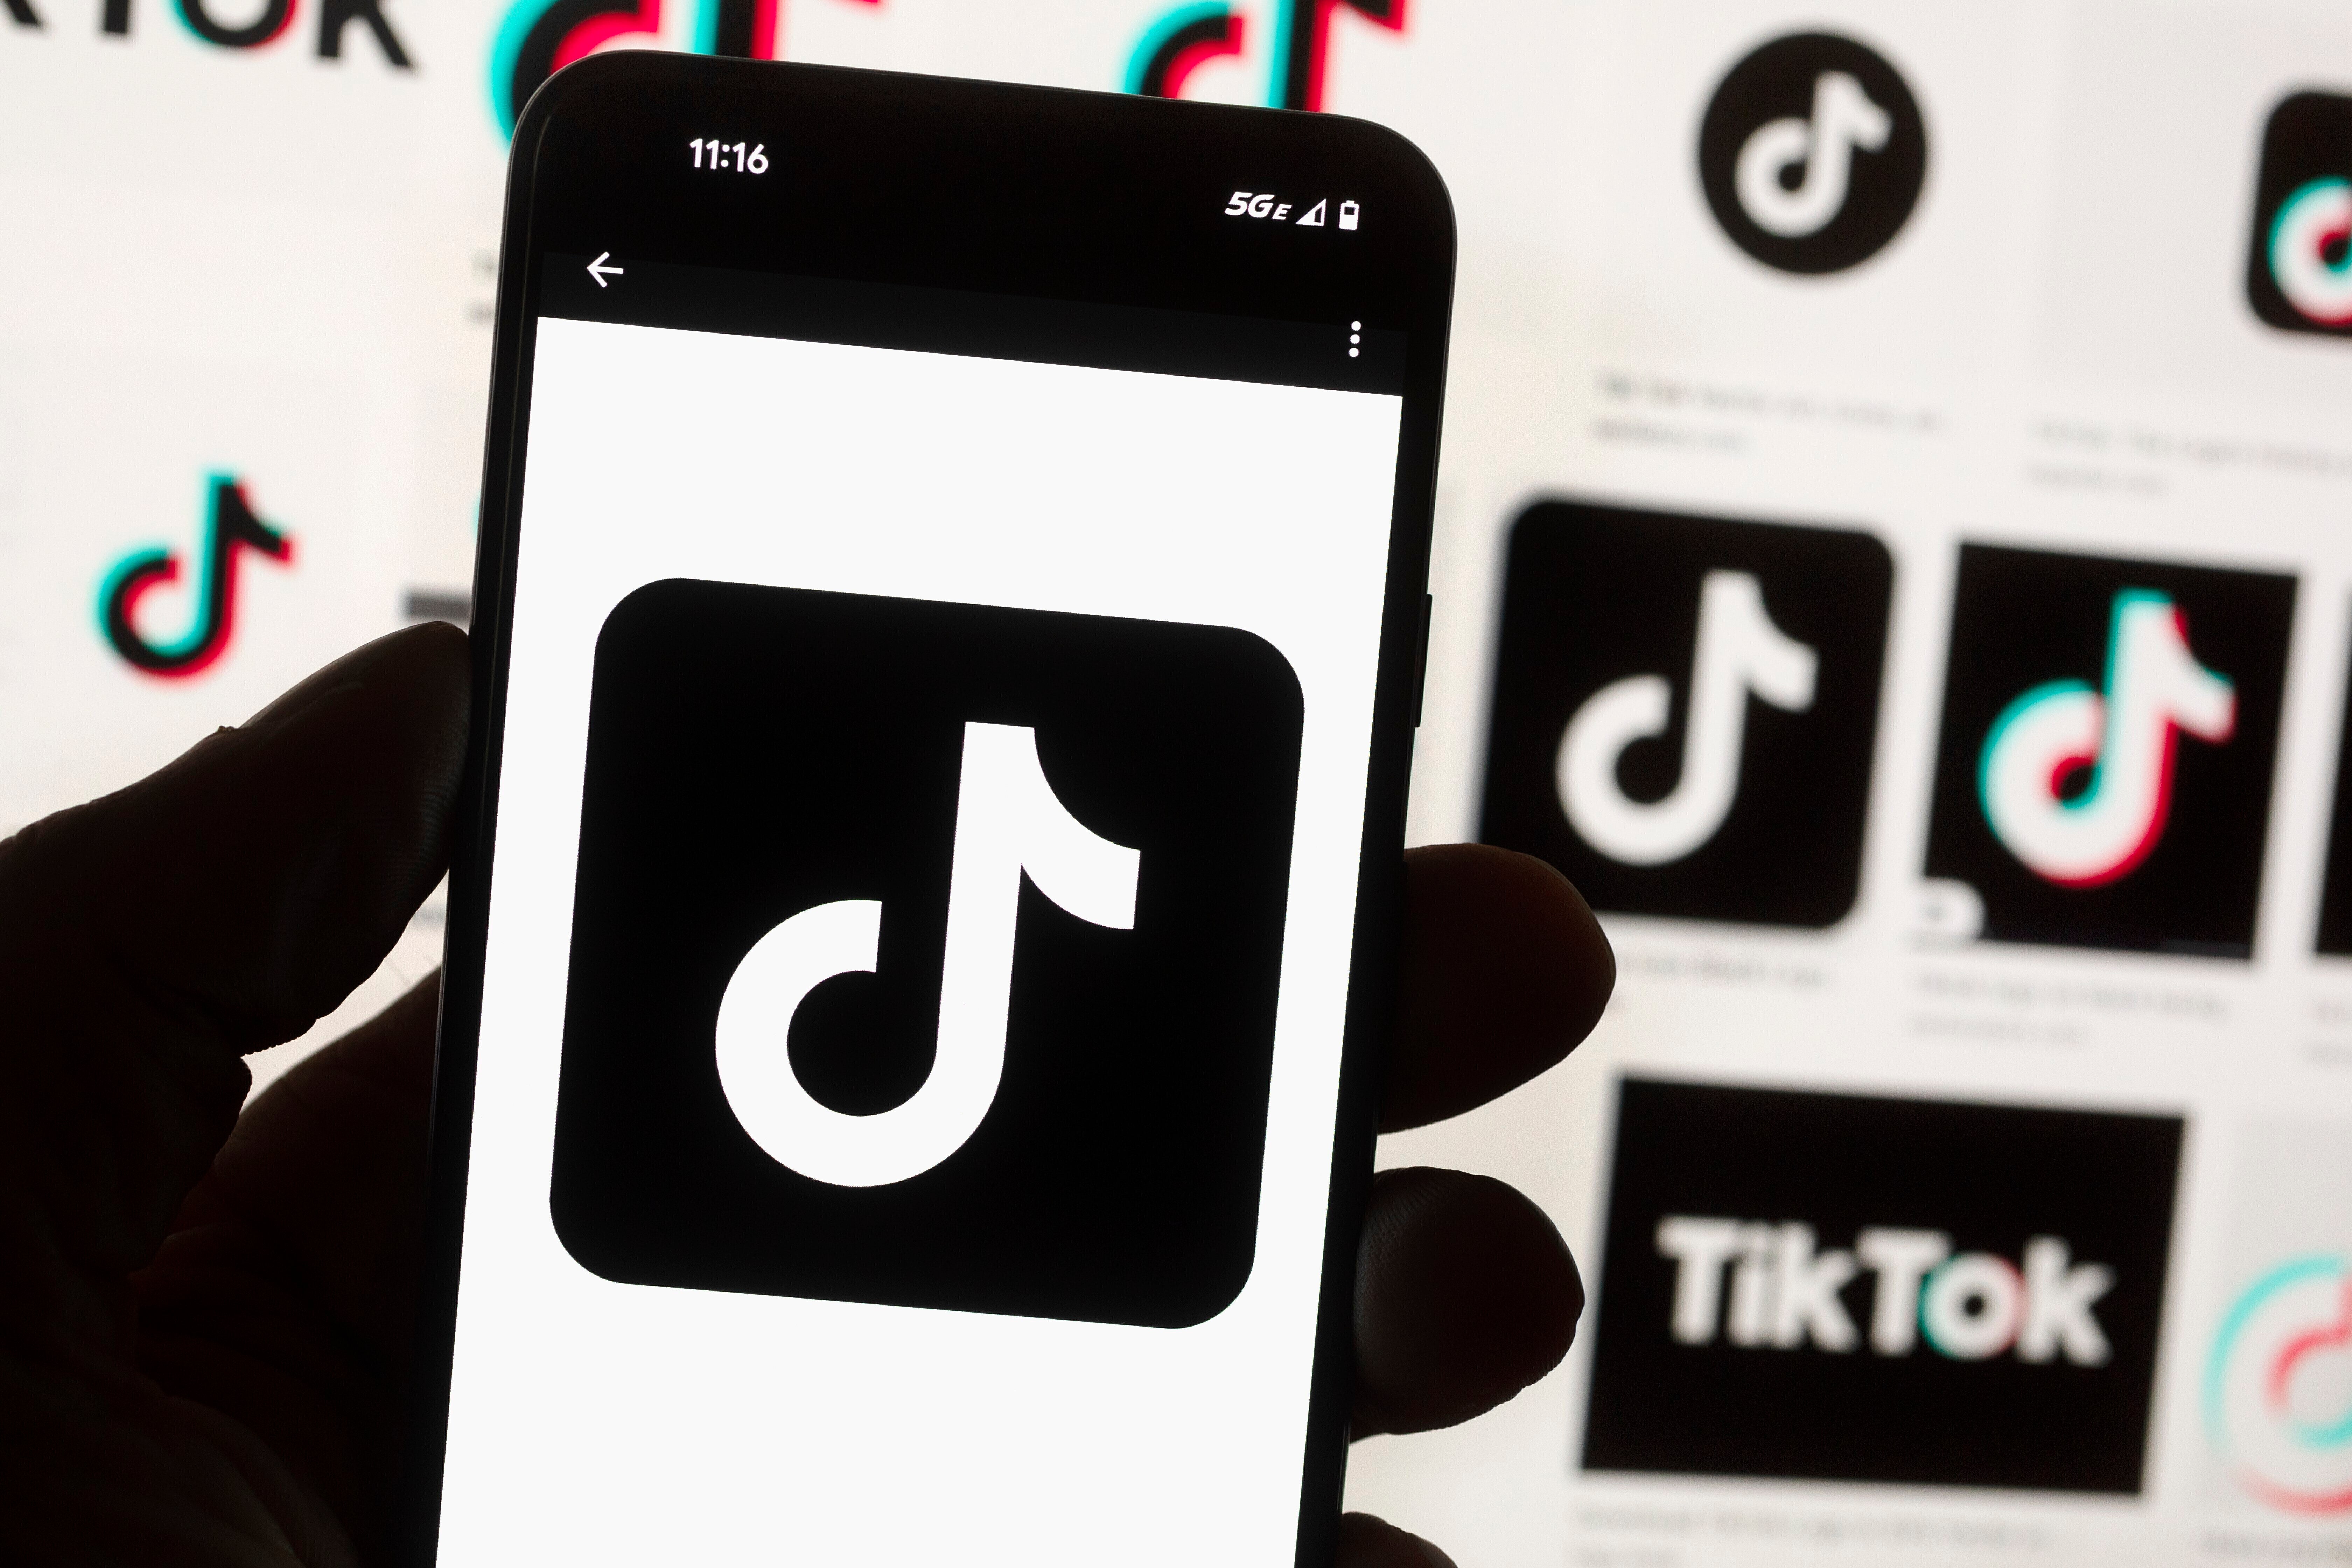 TikTok , a short-form social media platform, is suing the US government claiming that a potential ban of the site would violate the First Amendment